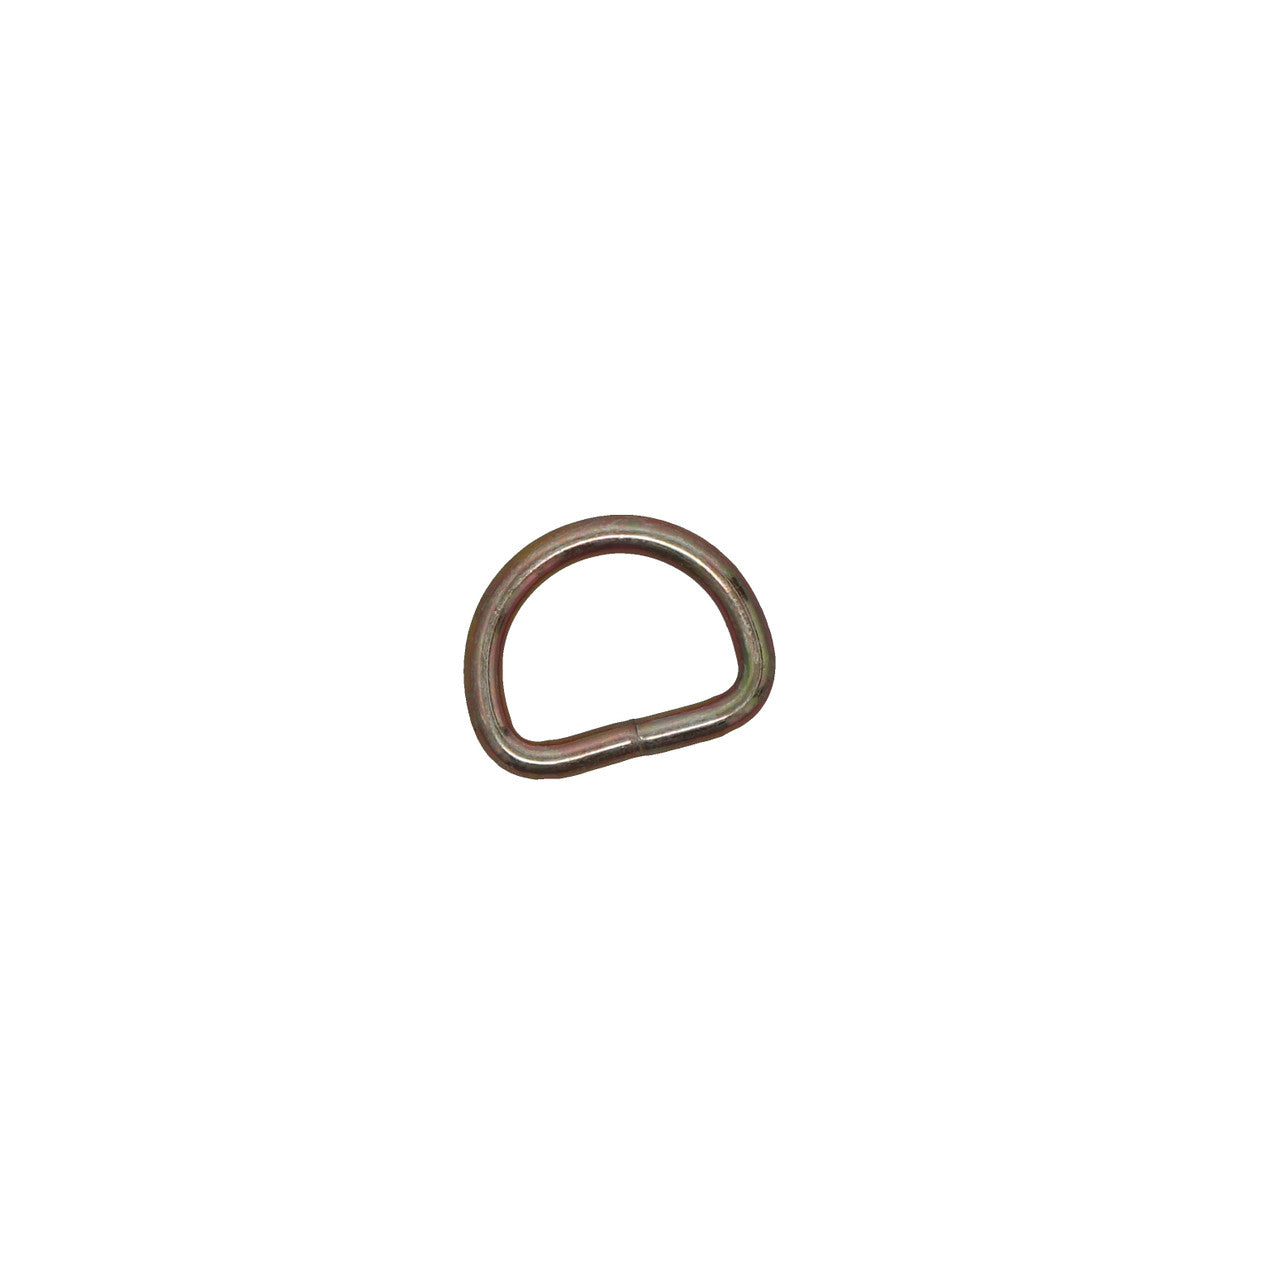 Kinedyne 1" D-Ring w/ NAS Number NAS1382-1